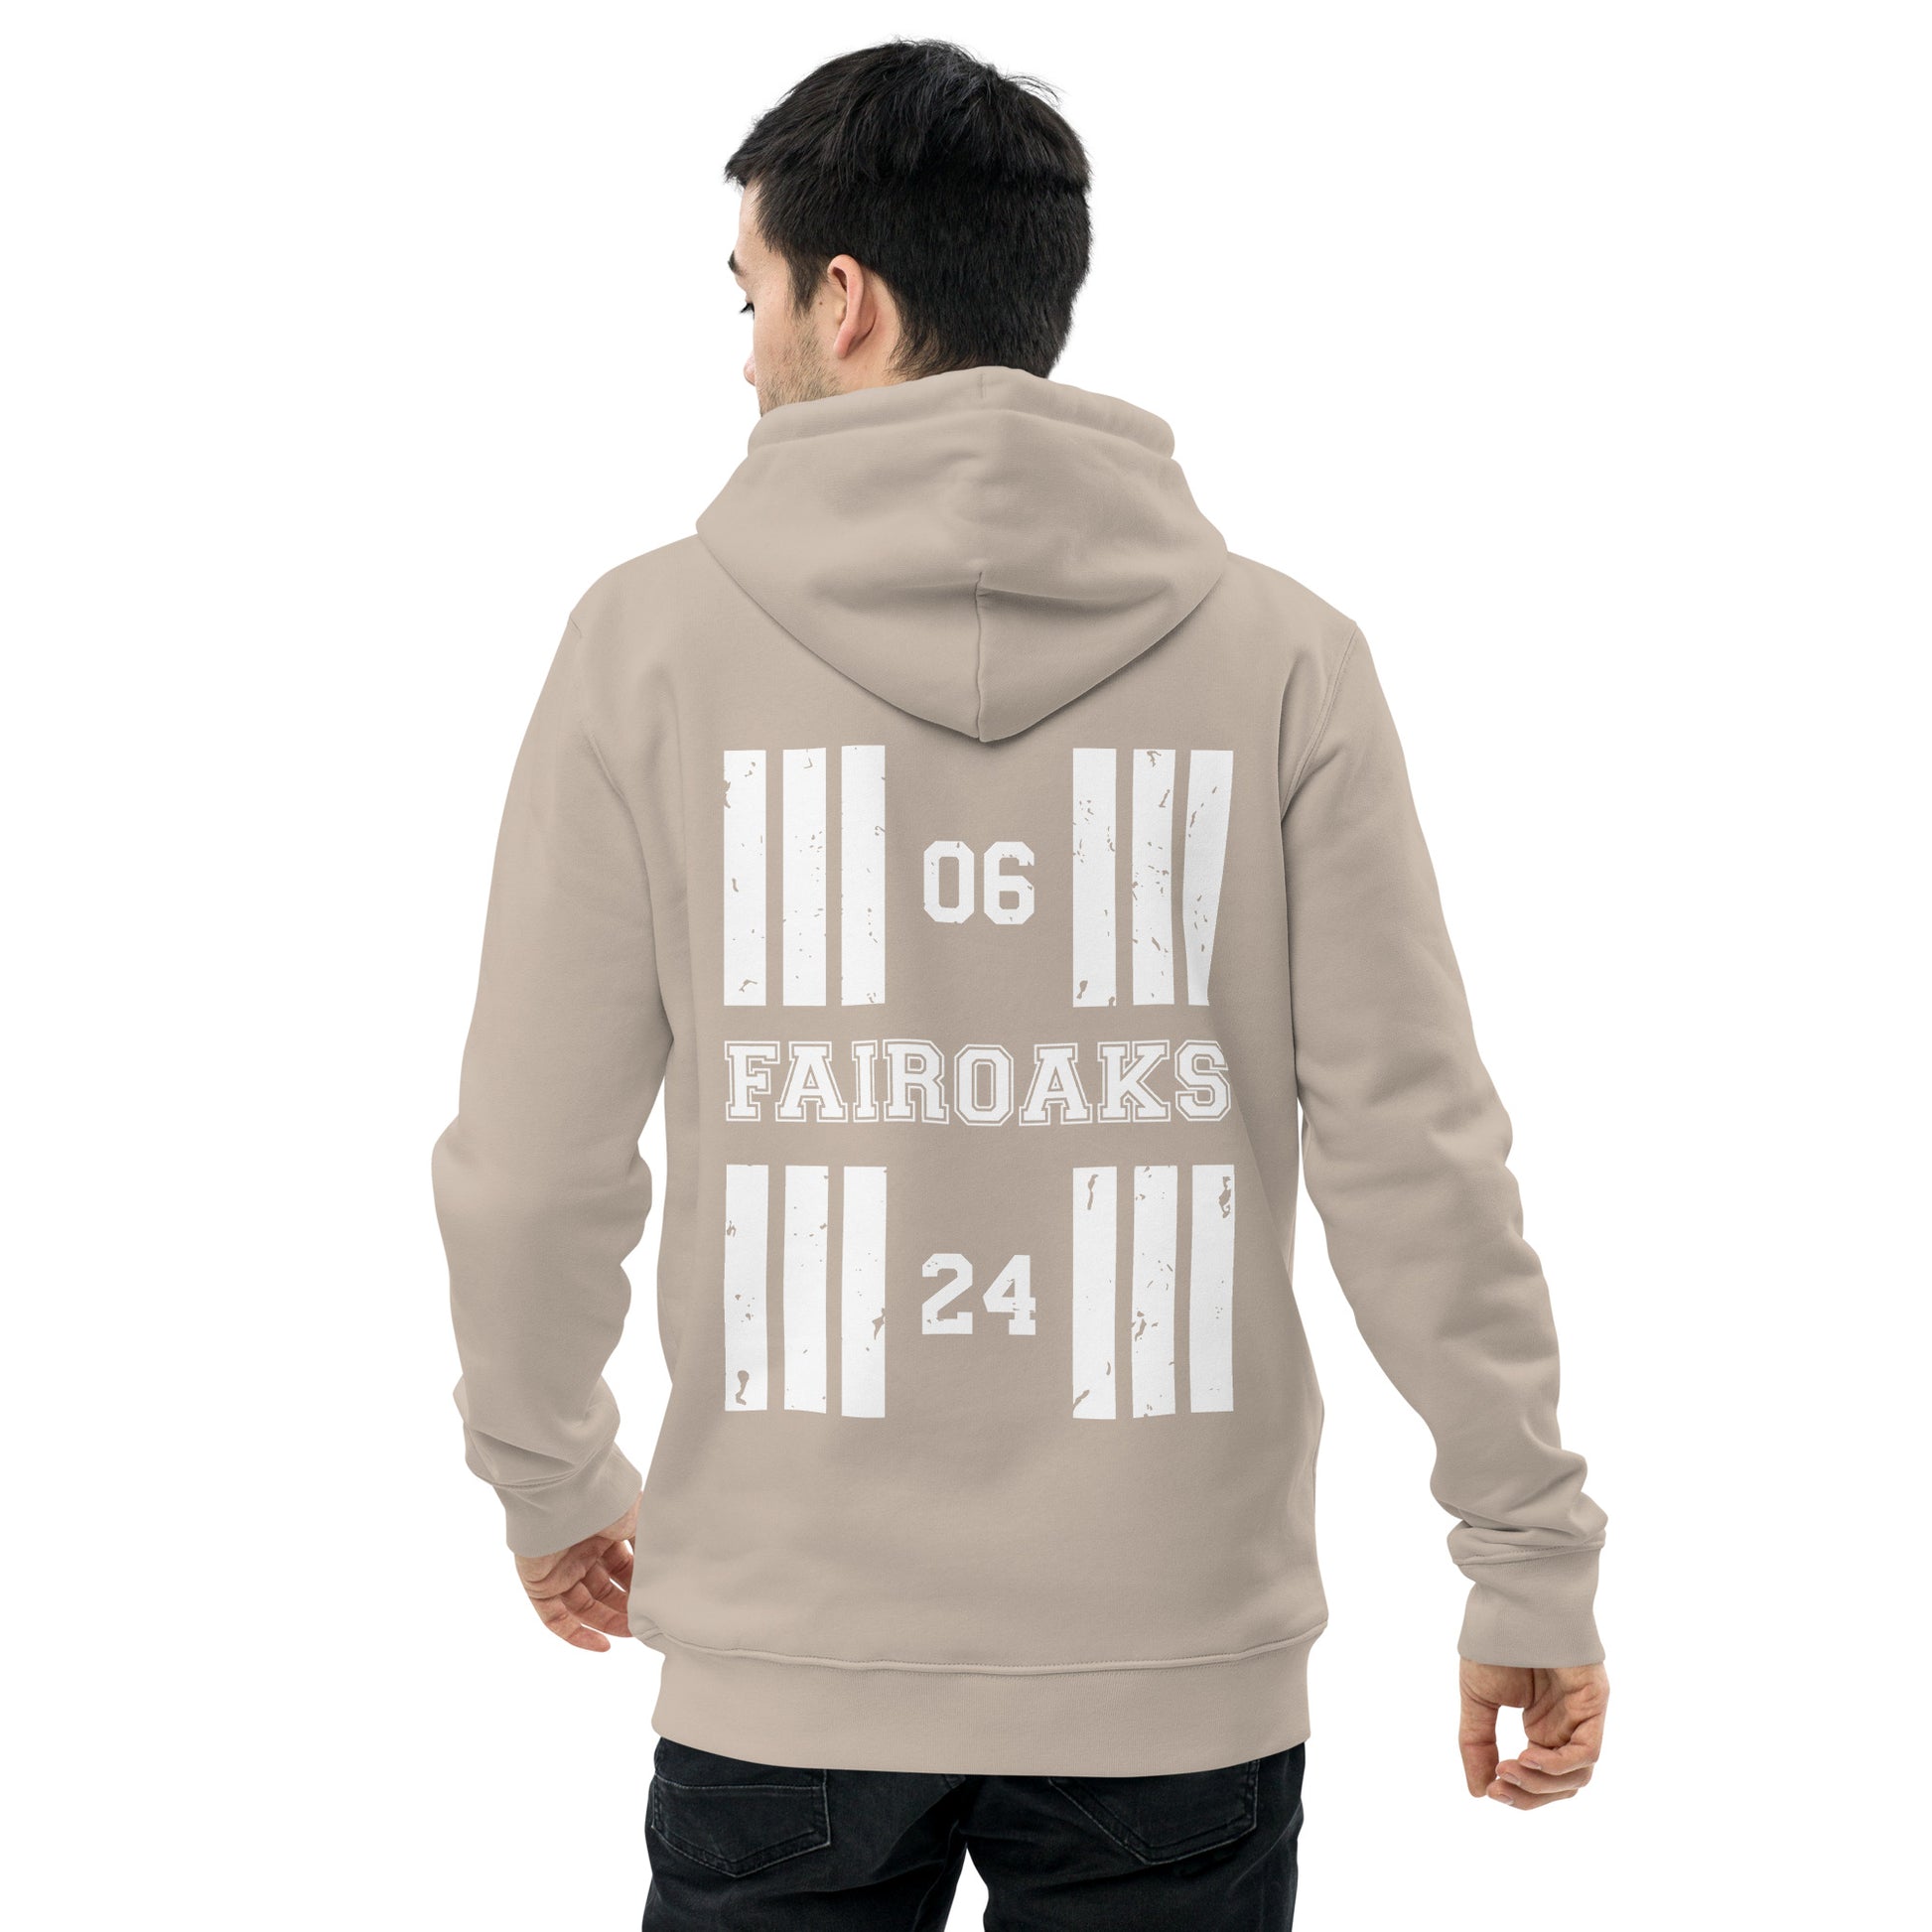 Coloured in a sandy gray called desert dust the Fairoaks Airport with ICAO code and Runway Designator unisex heavyweight hoodie features a discreet collegiate print on the front with a bold print featuring the airport's name and designator, framed by stylised distressed threshold markings on the back.